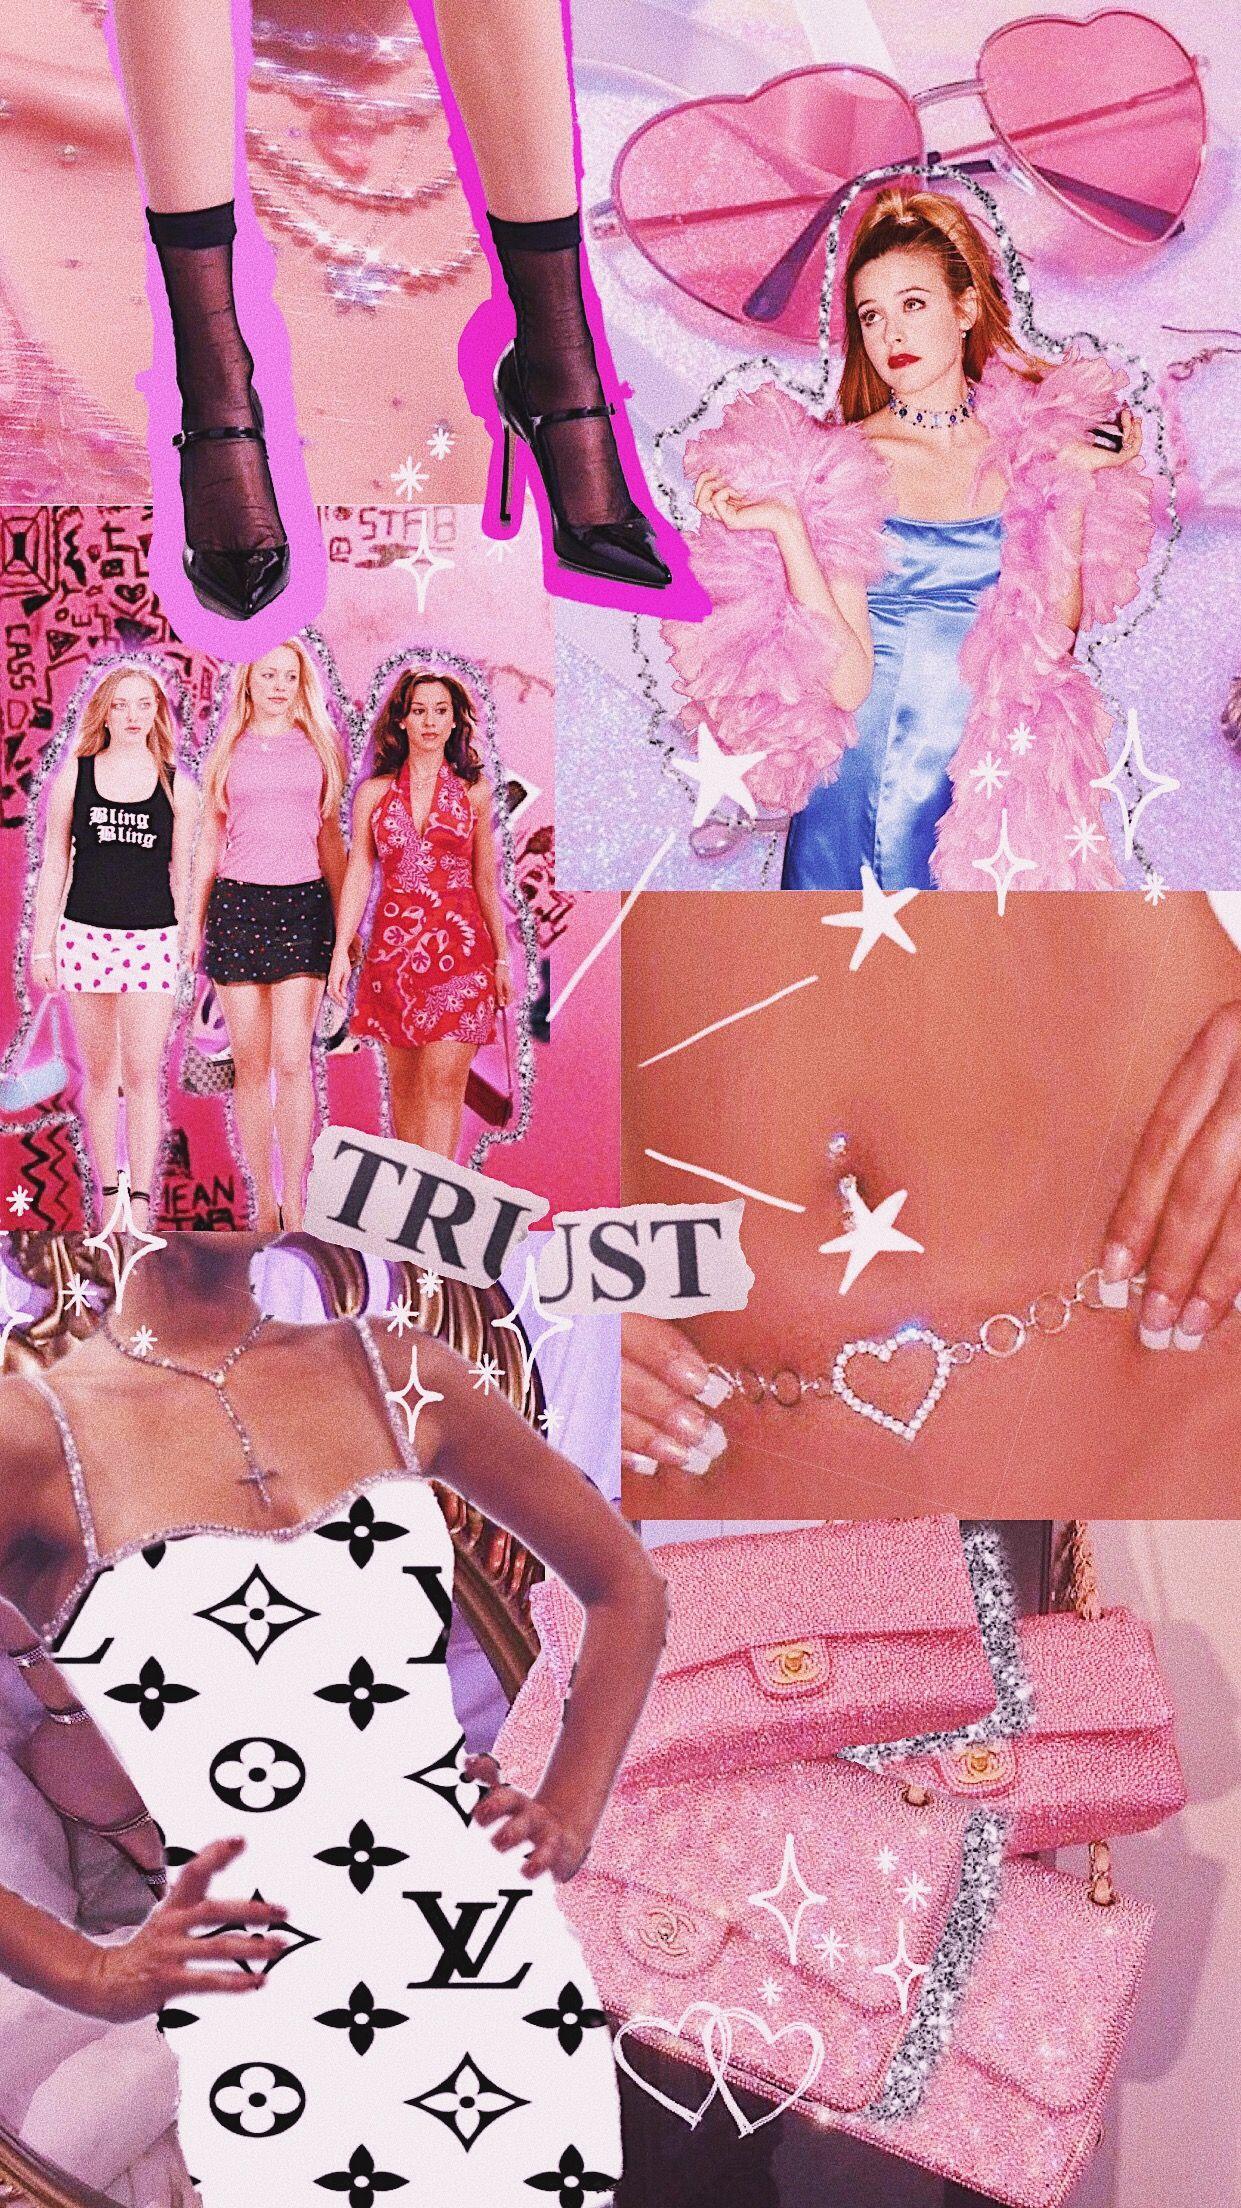 mean girls clueless Louis Vuitton 2000s aesthetic wallpapers pink.